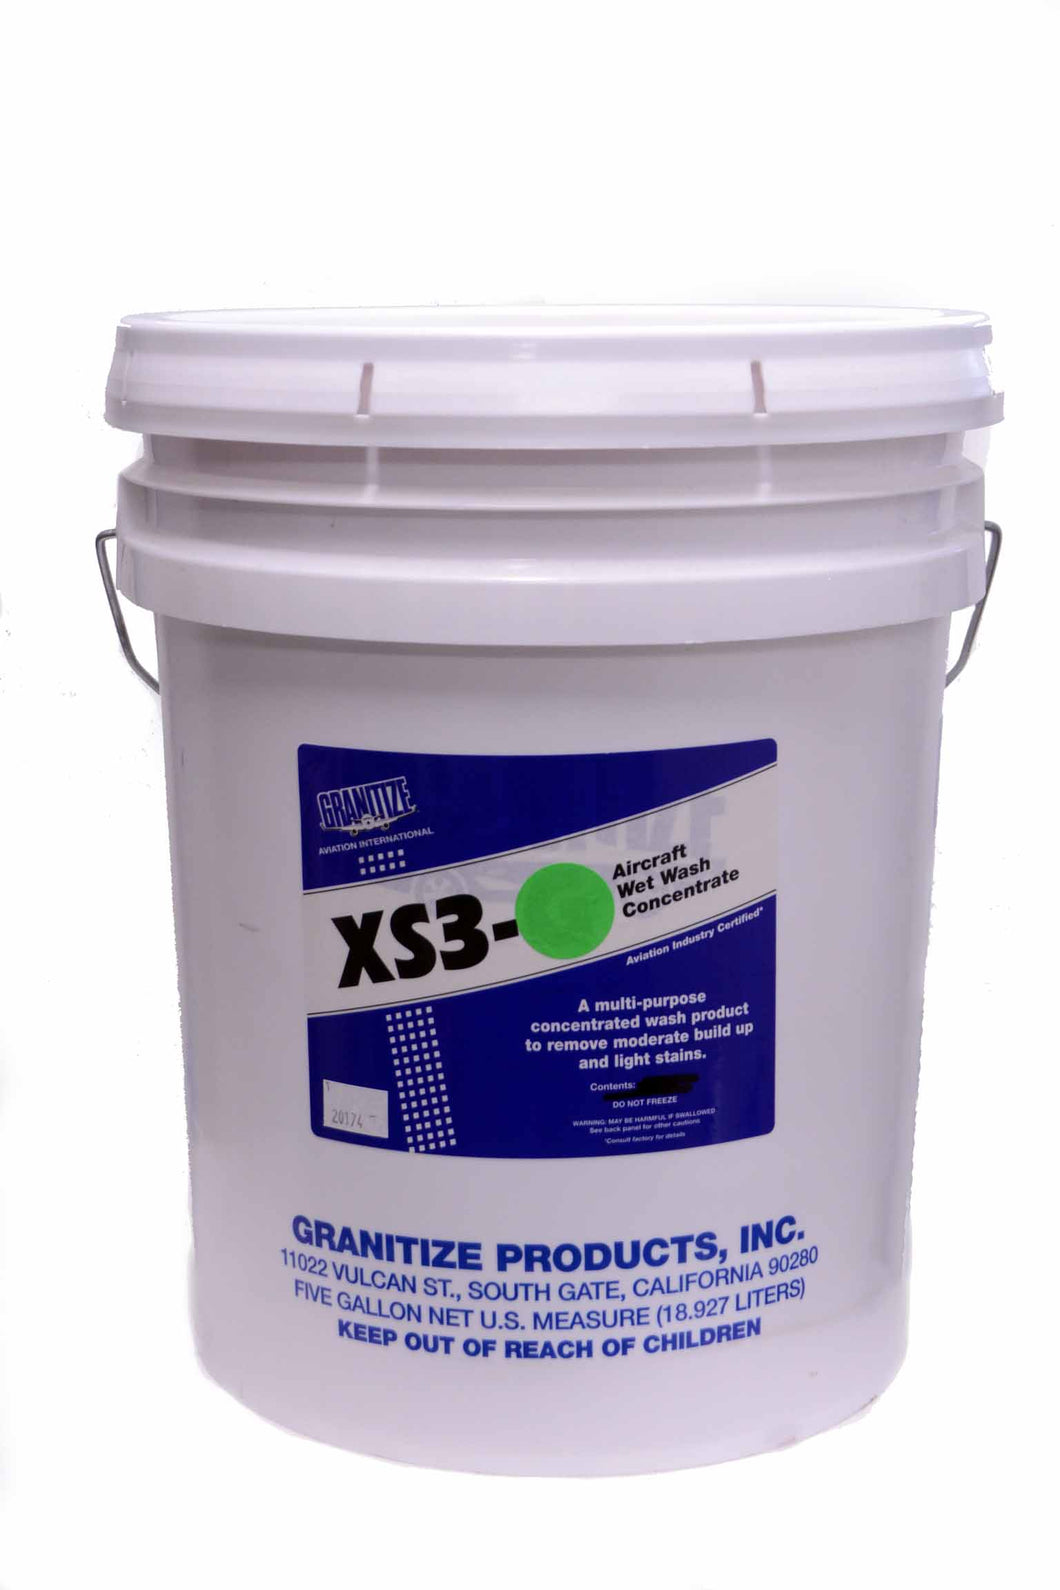 GRANITIZE XS3 Wash & Wax Concentrate Shampoo